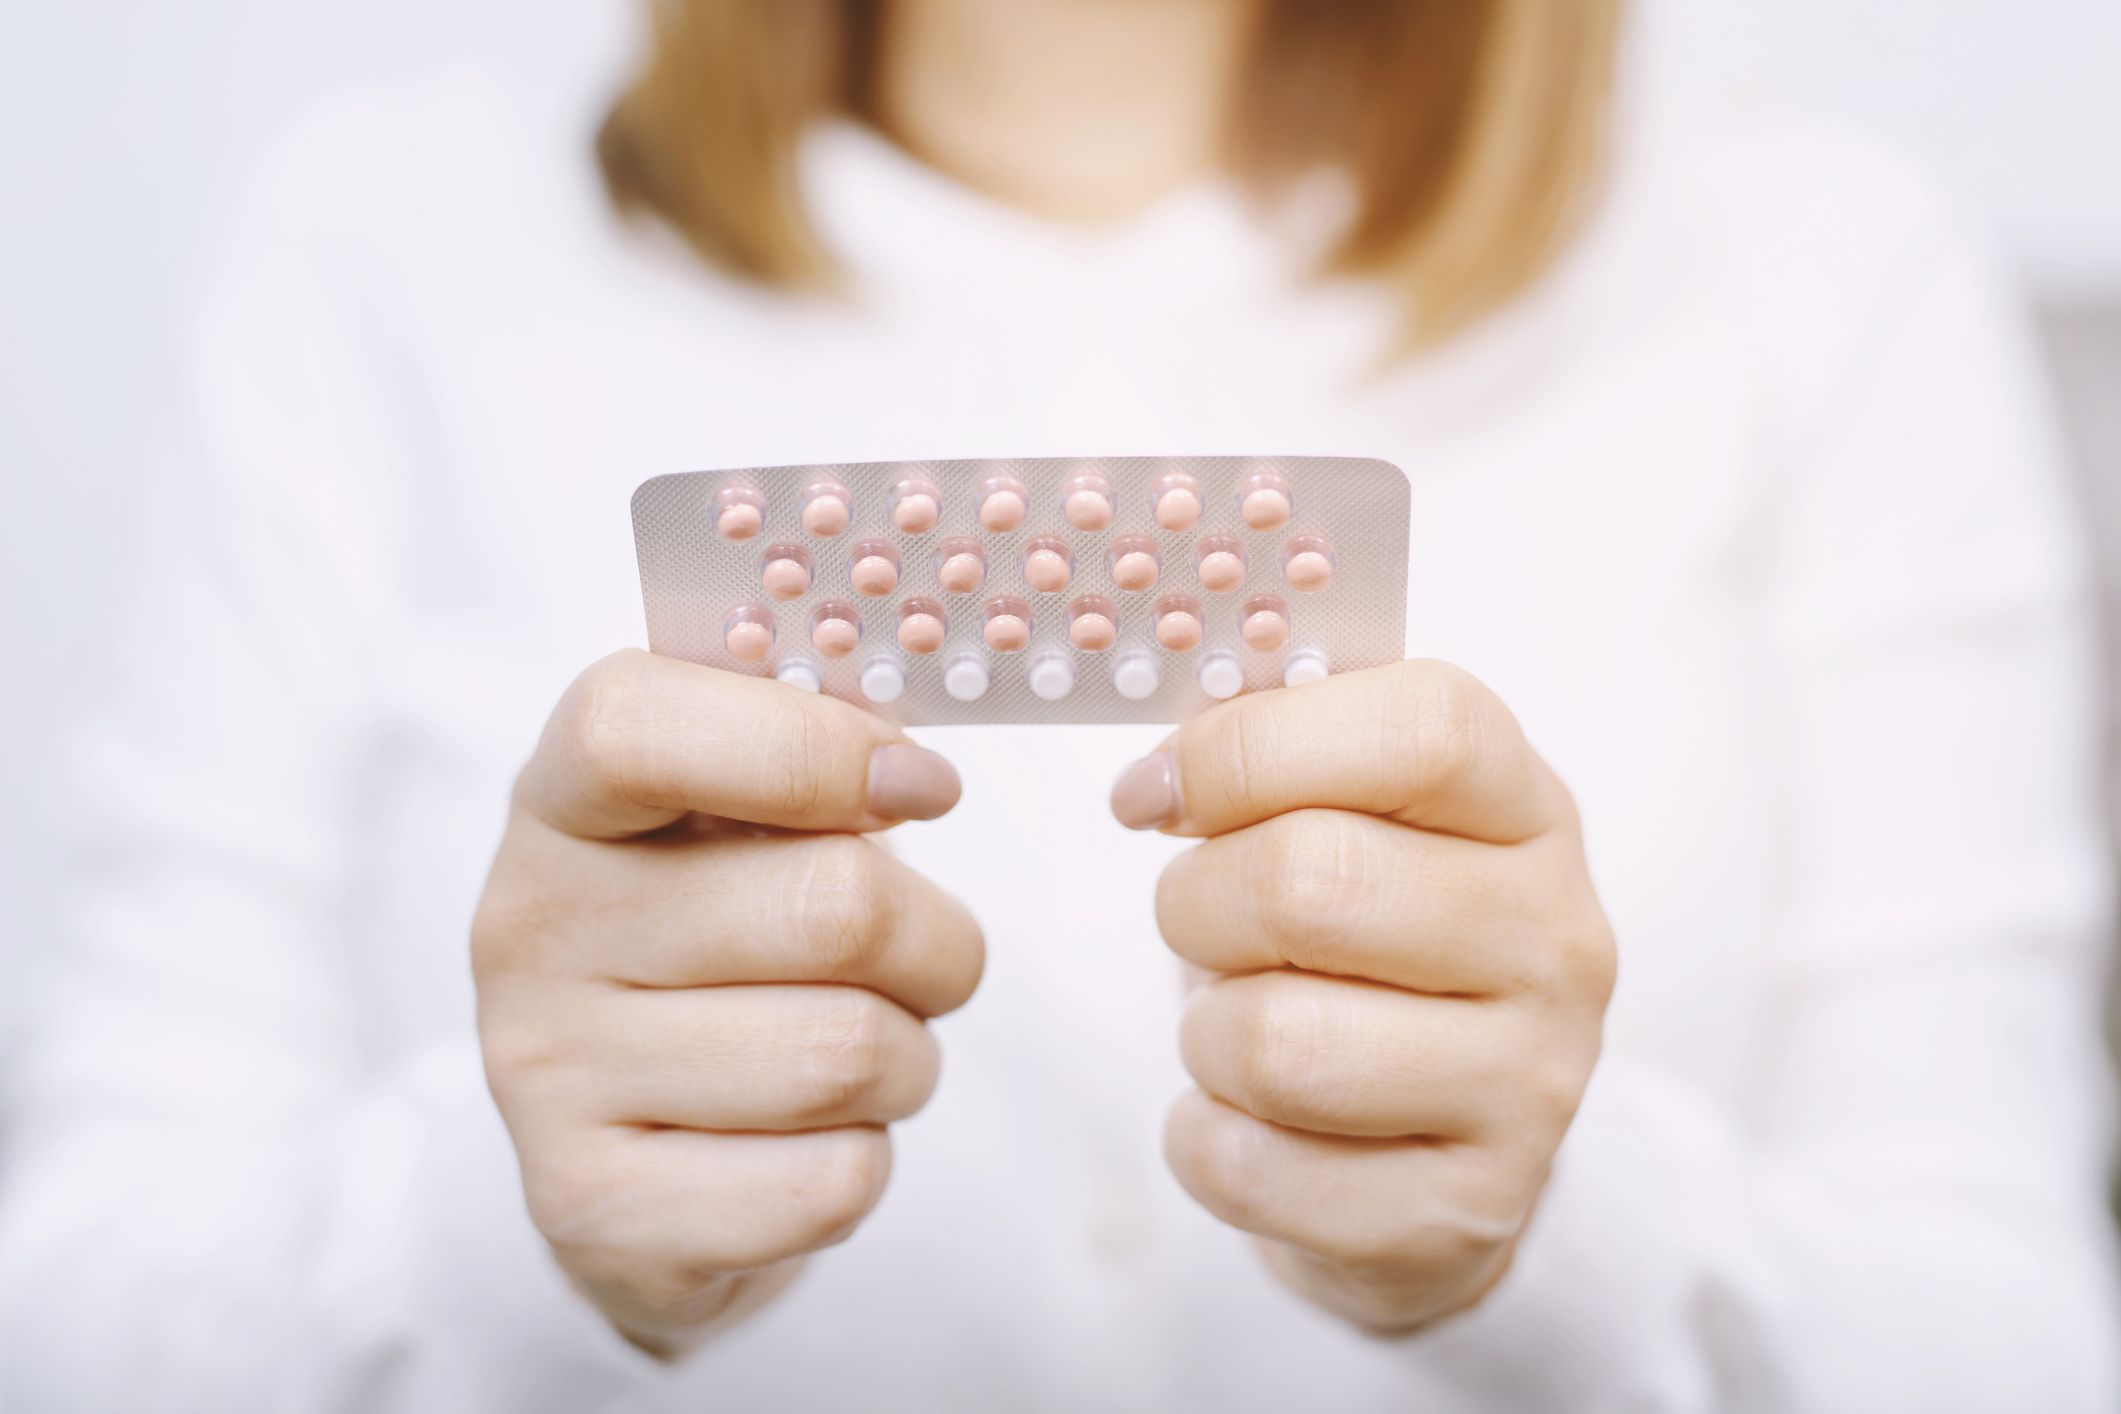 woman hands opening birth control pills in hand eating contraceptive pill contraception reduces childbirth and pregnancy concept